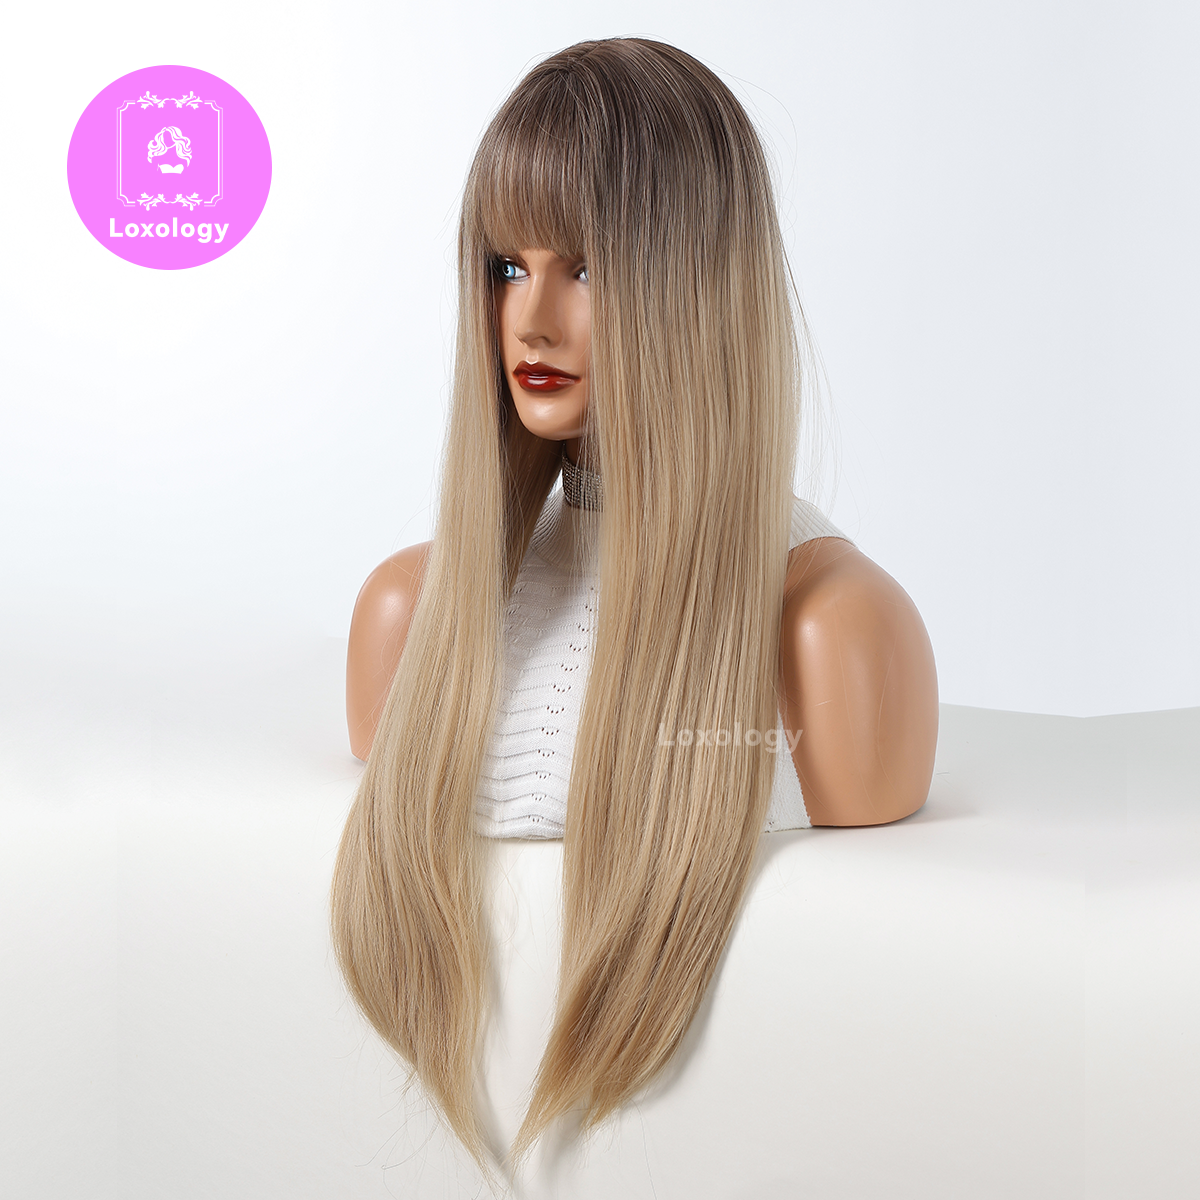 【Vesper】Loxology | 28 Inch Brown Ombre Blonde Long Straight Wigs for Women